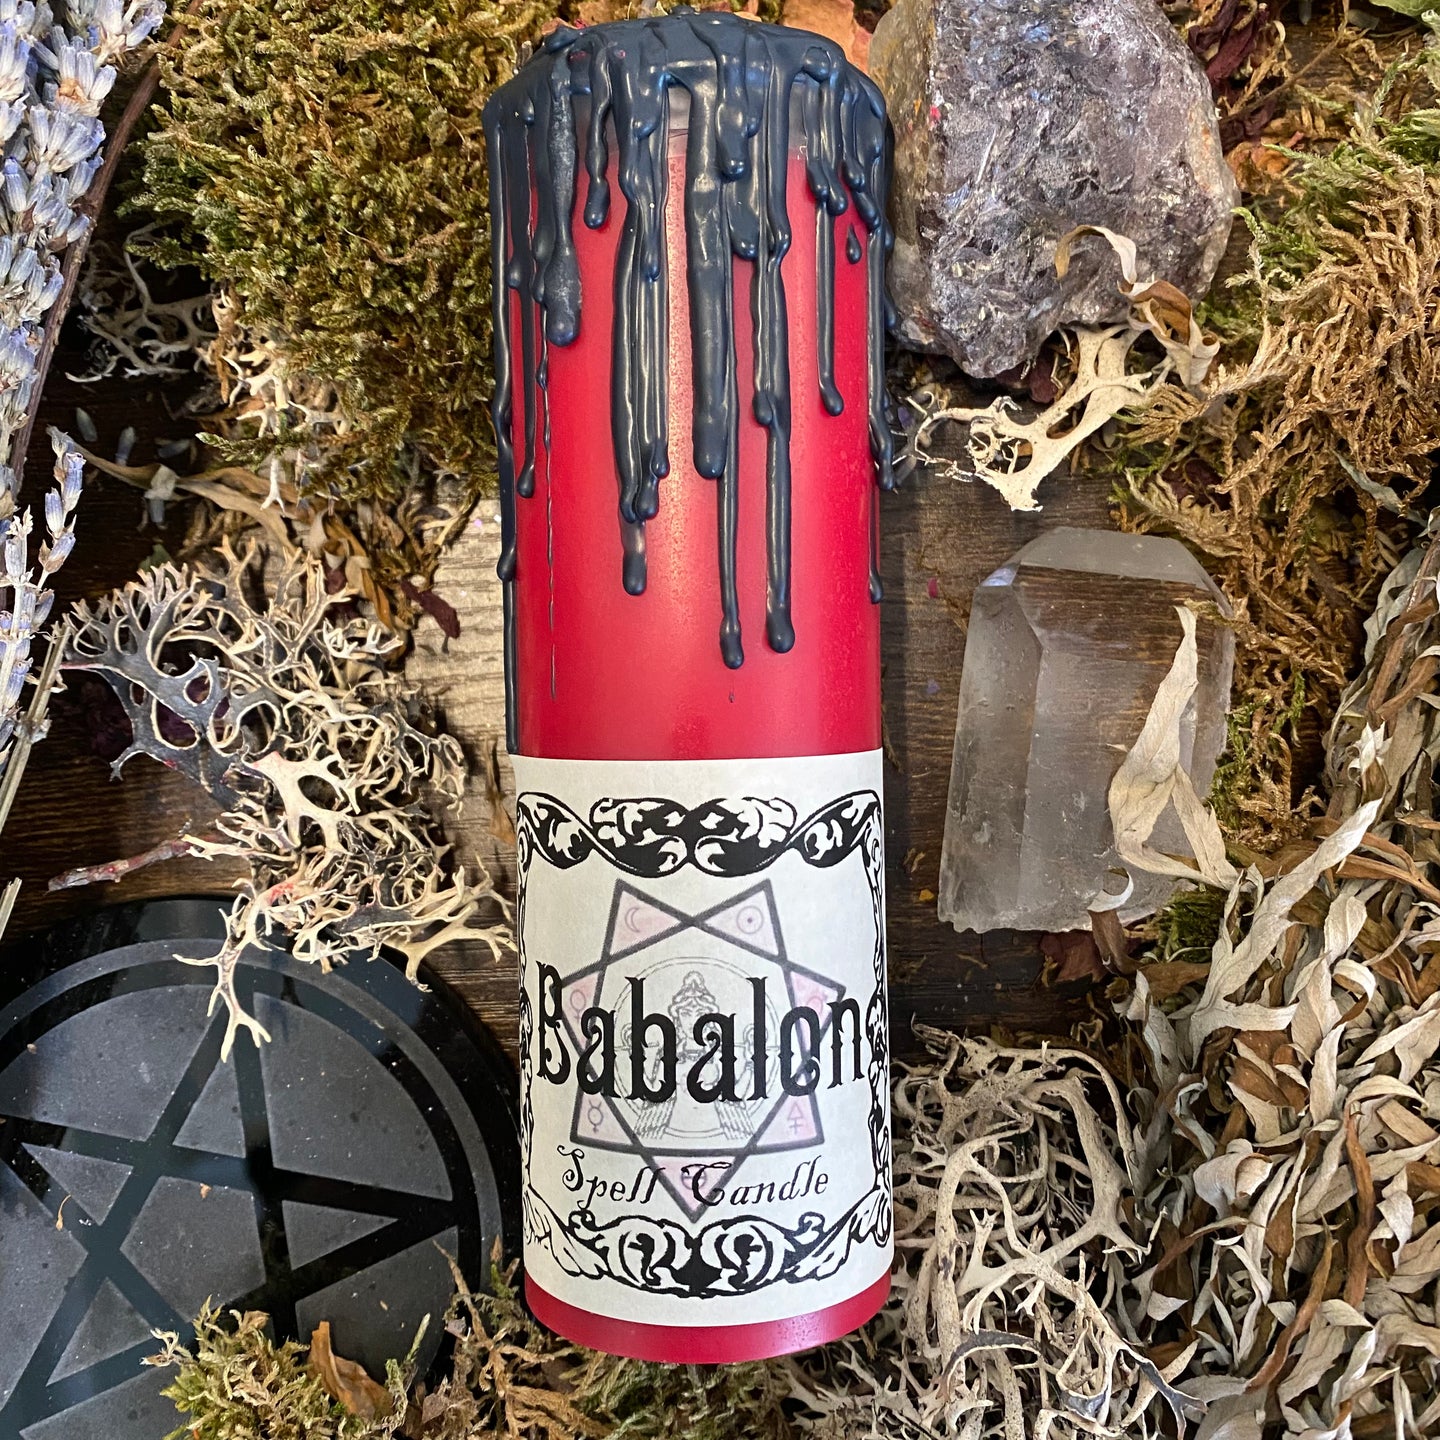 Babalon Scarlet Woman Ritual Spell Candle